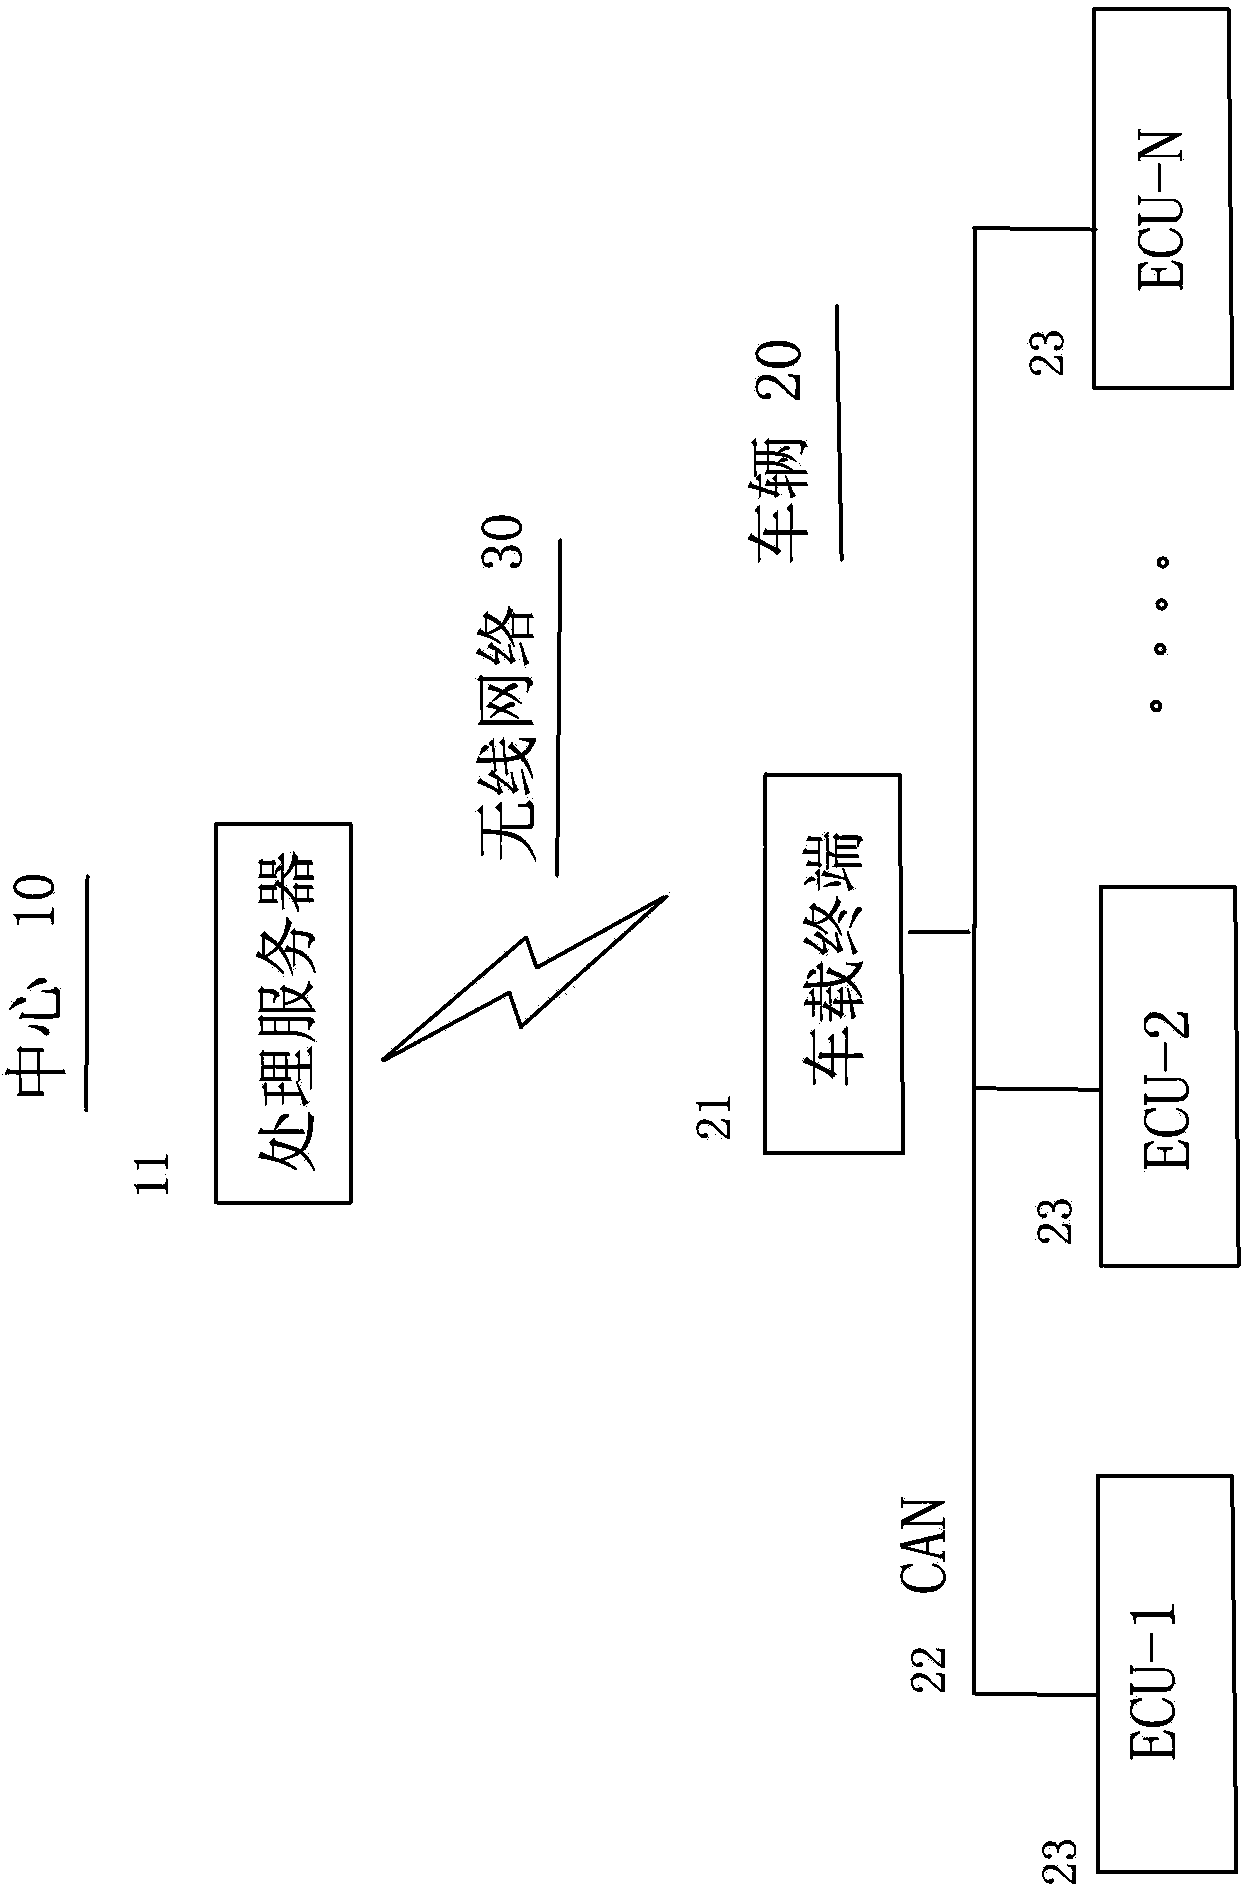 Method for extracting vehicle state information from center